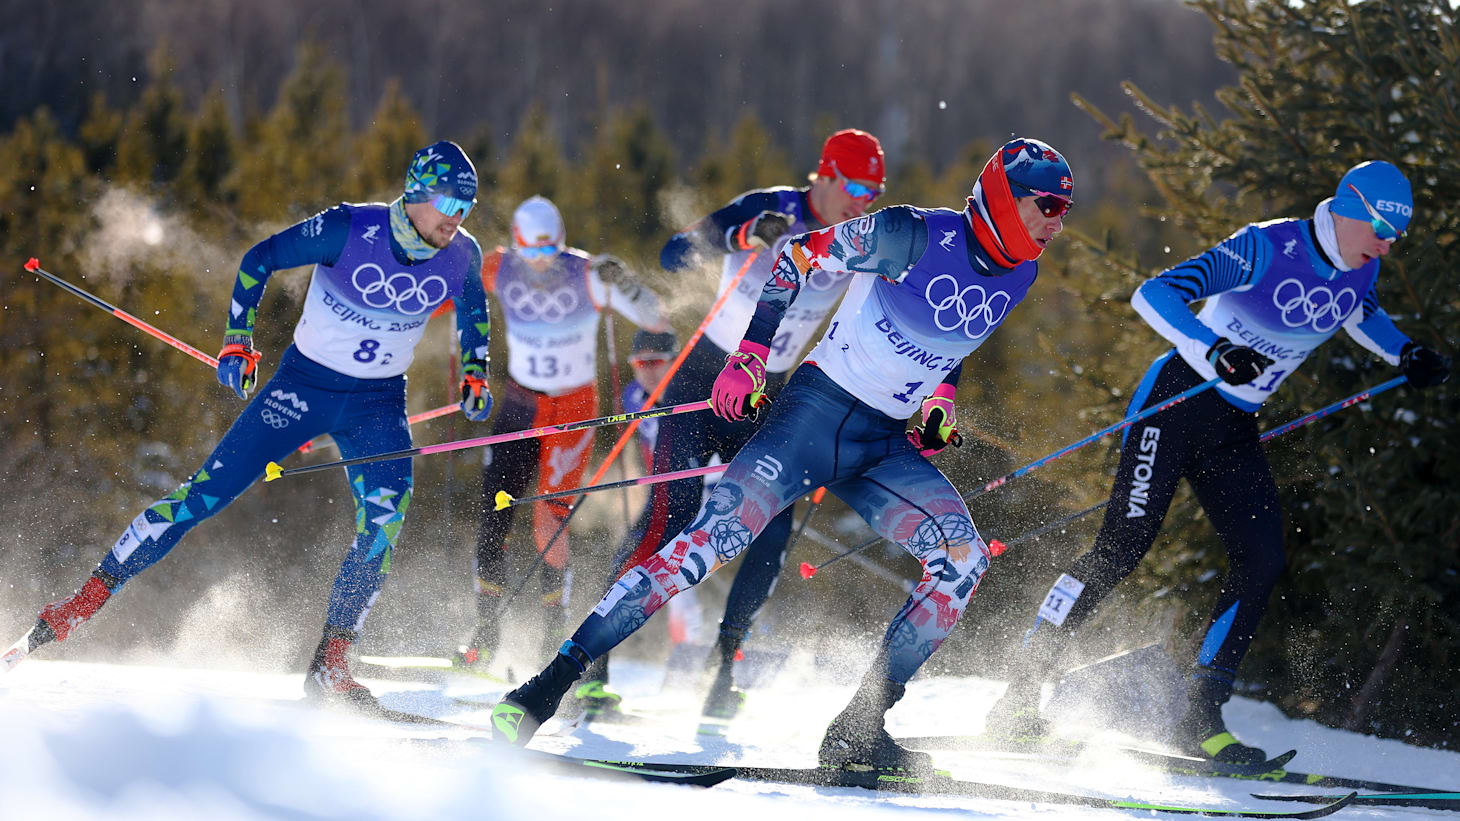 cross country skiing world cup live stream